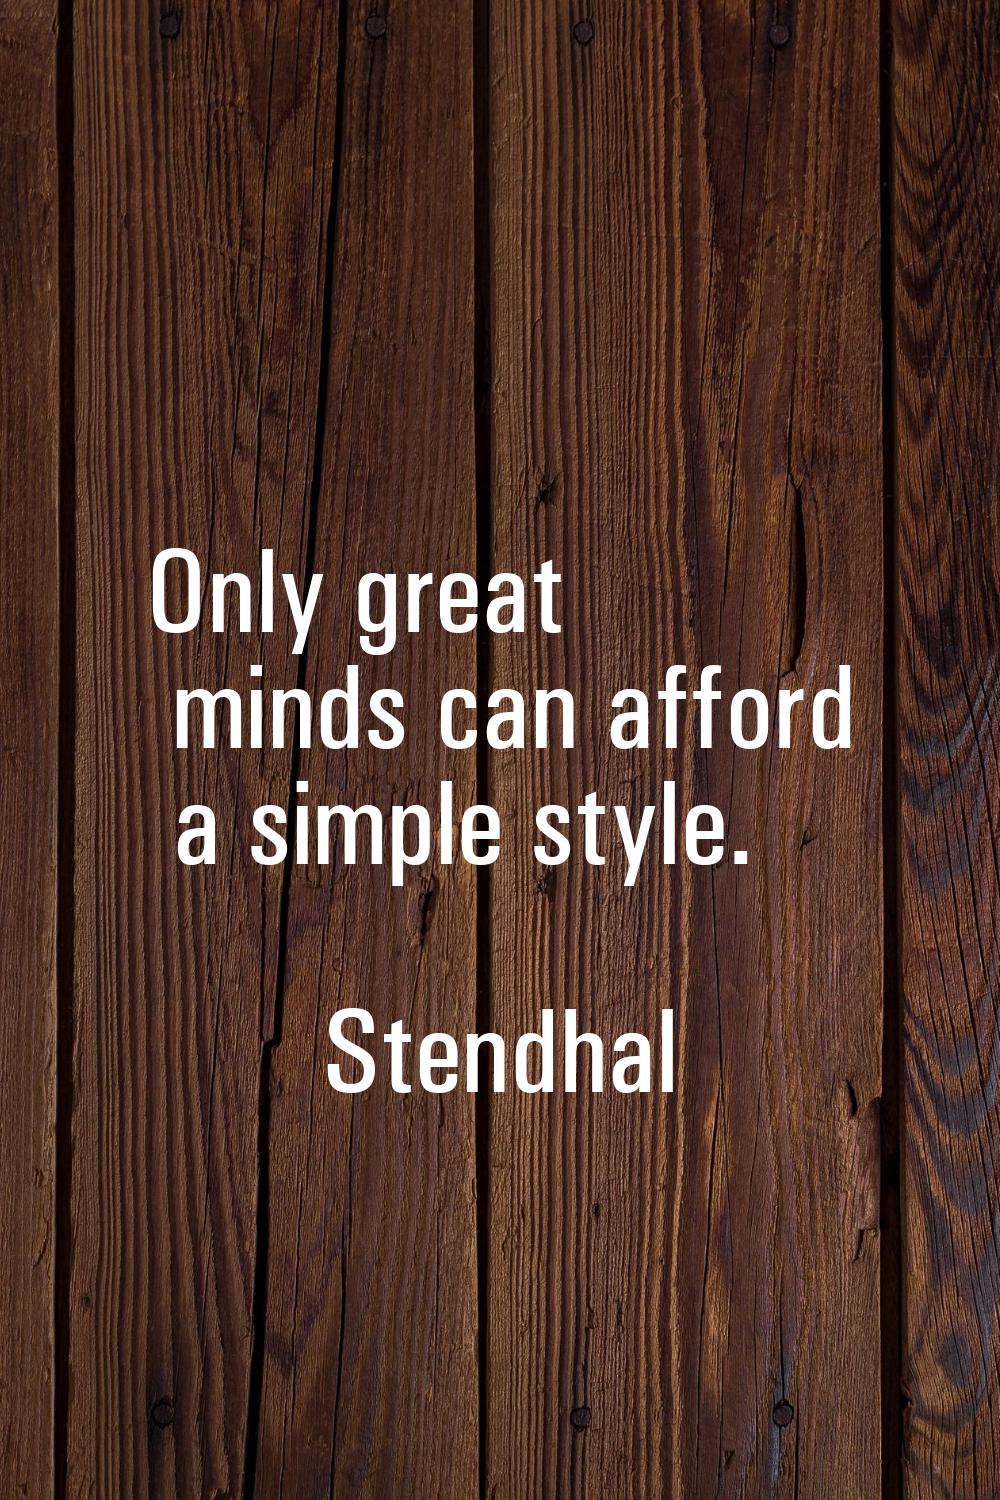 Only great minds can afford a simple style.